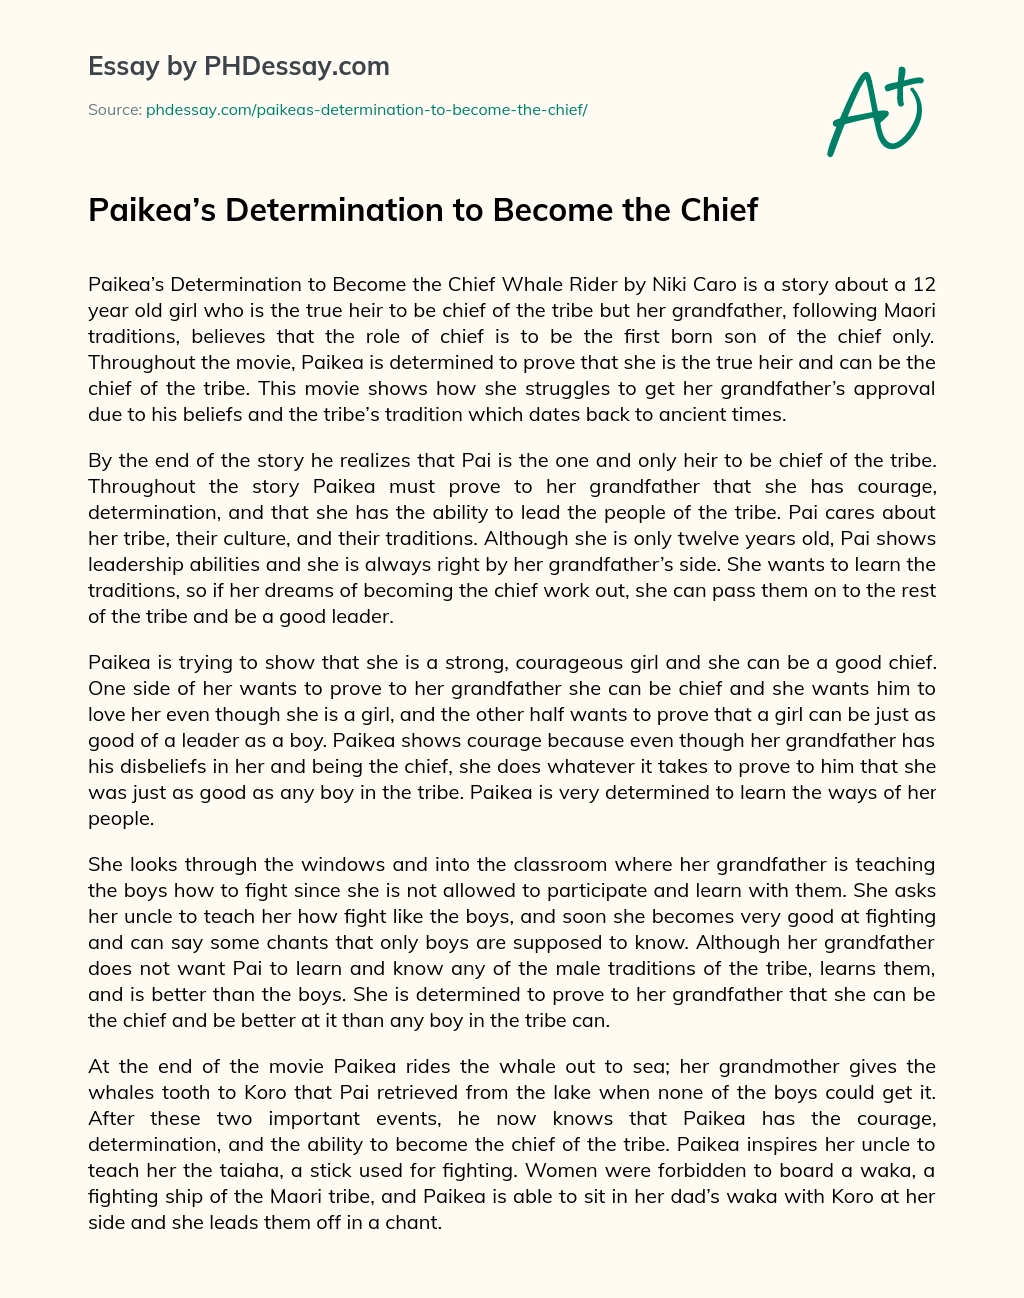 Paikea’s Determination to Become the Chief essay